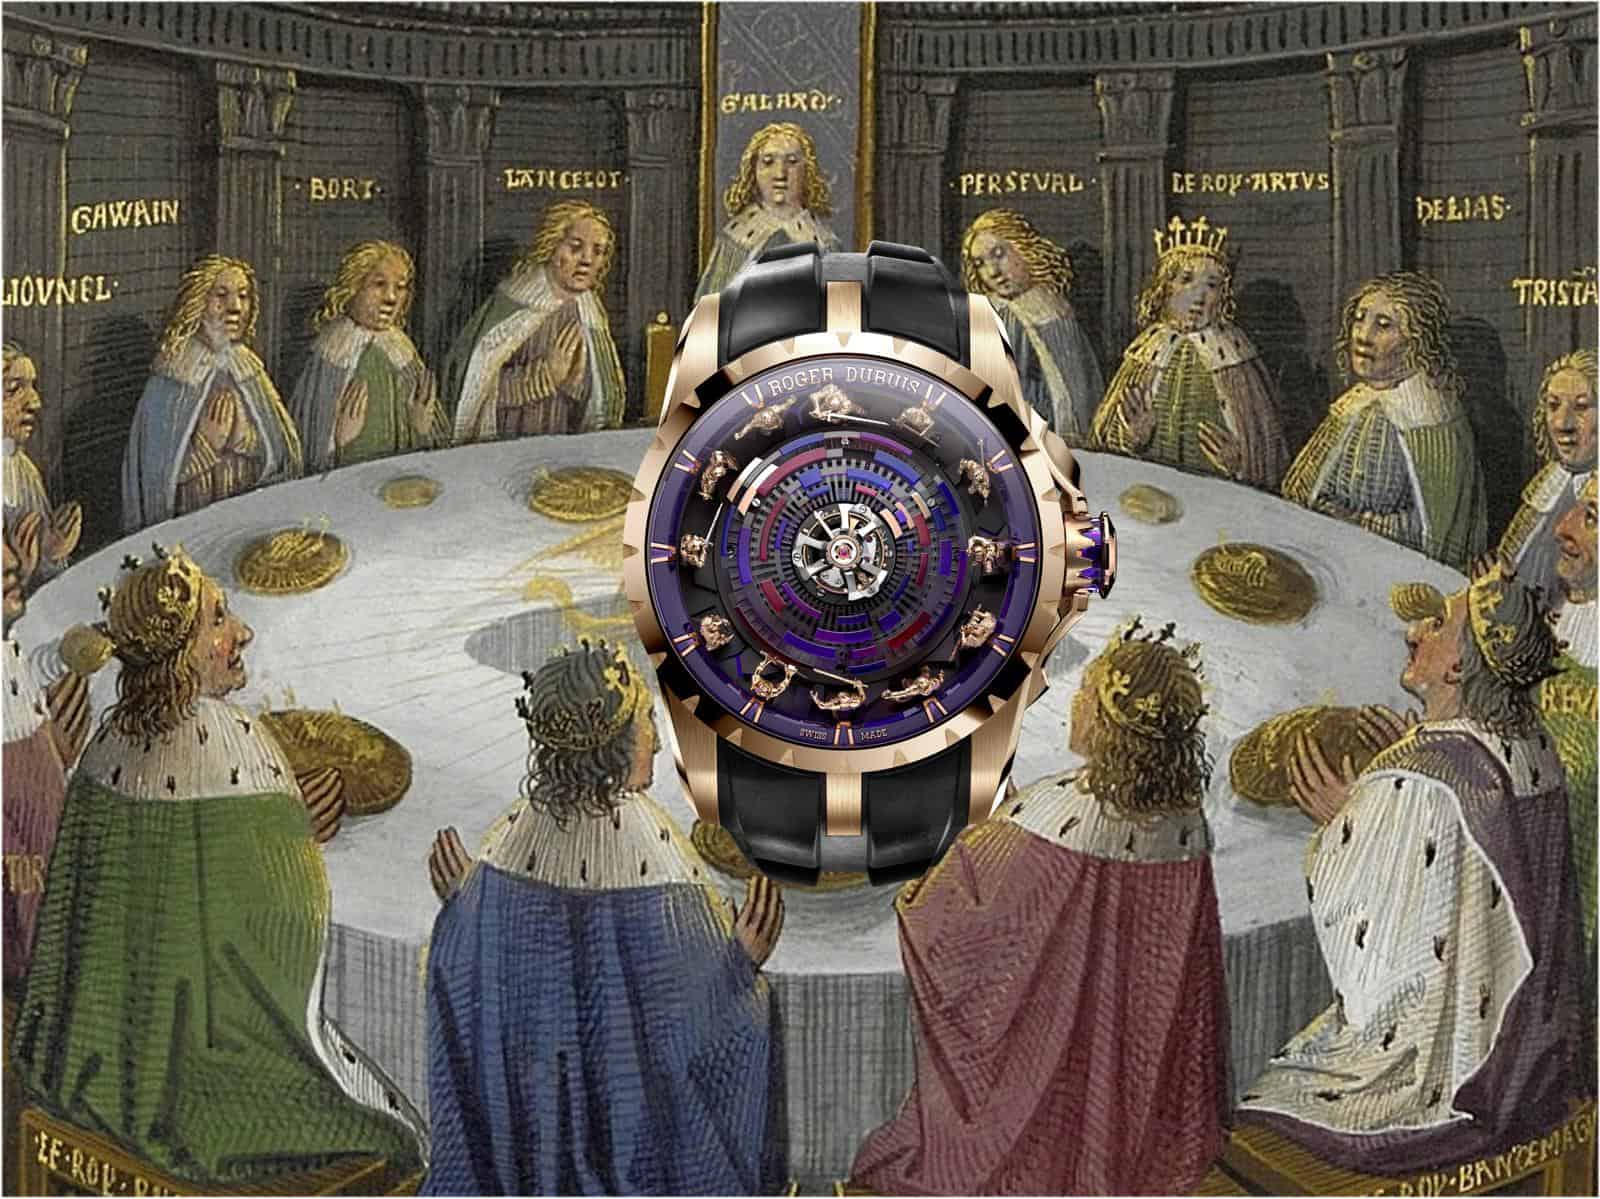 Roger Dubuis Knights Of The Round Table Monotourbillon